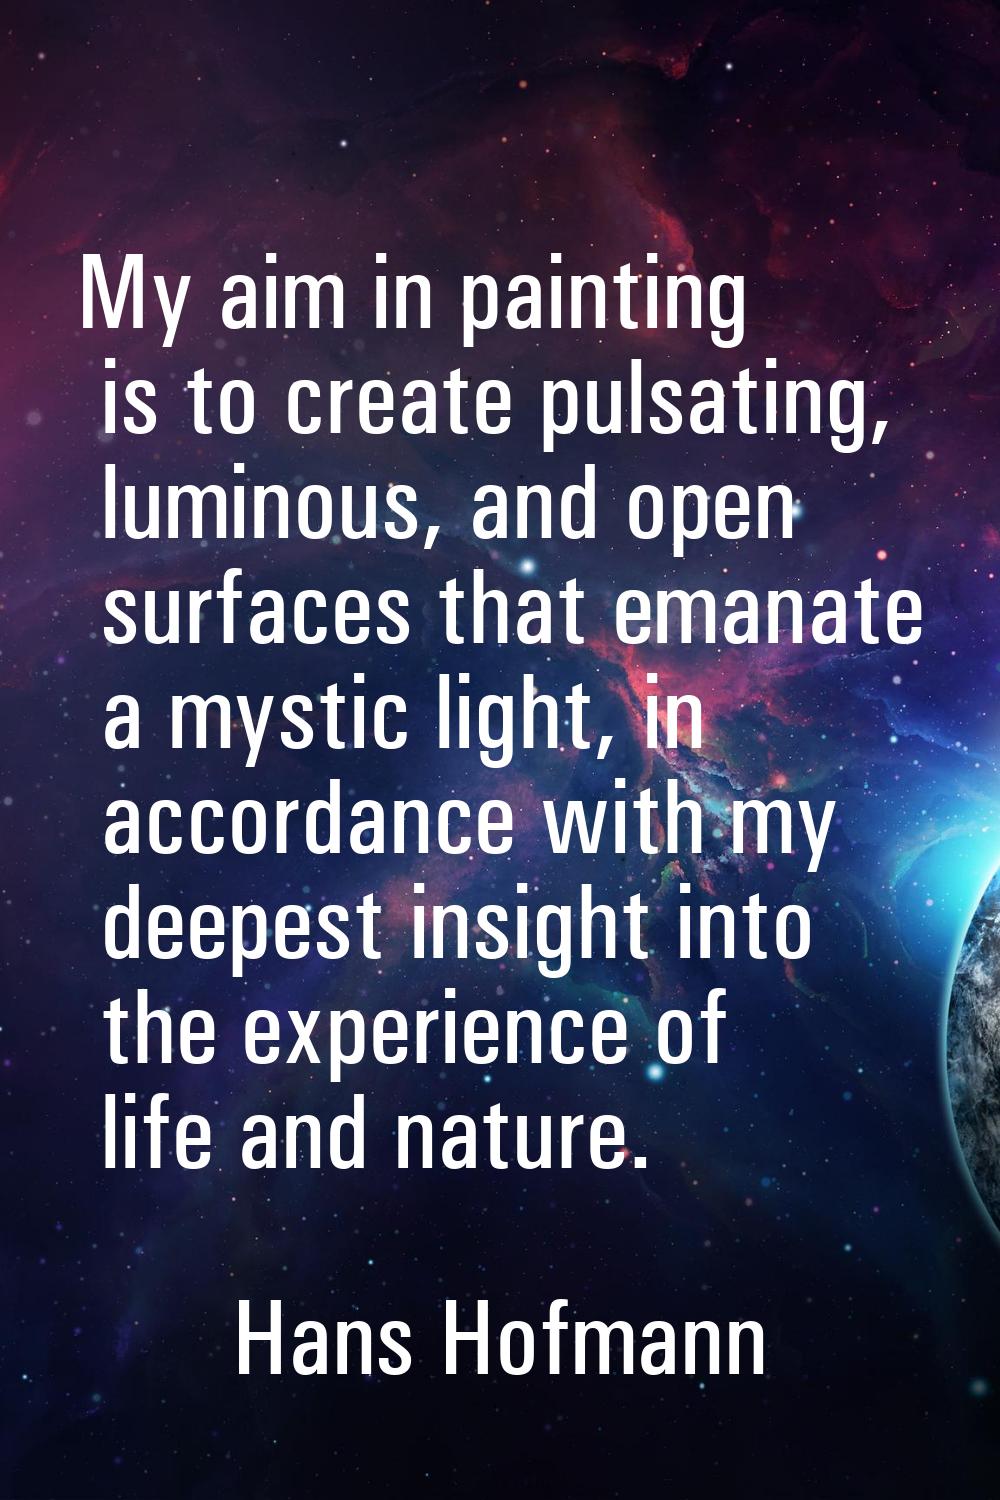 My aim in painting is to create pulsating, luminous, and open surfaces that emanate a mystic light,